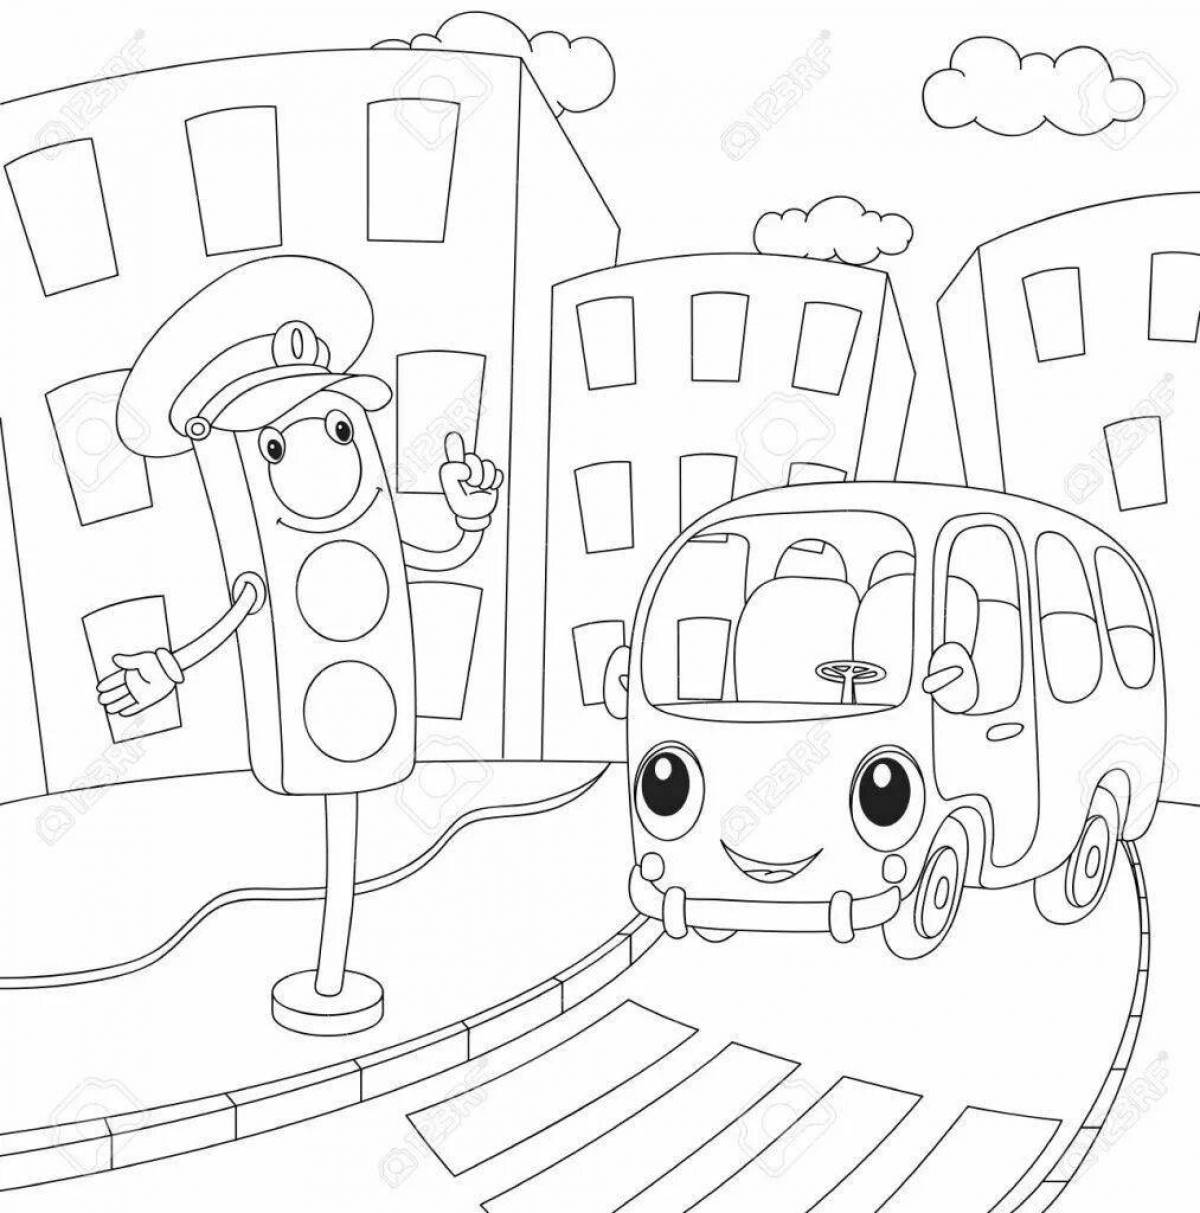 Bright coloring pages for kindergarten